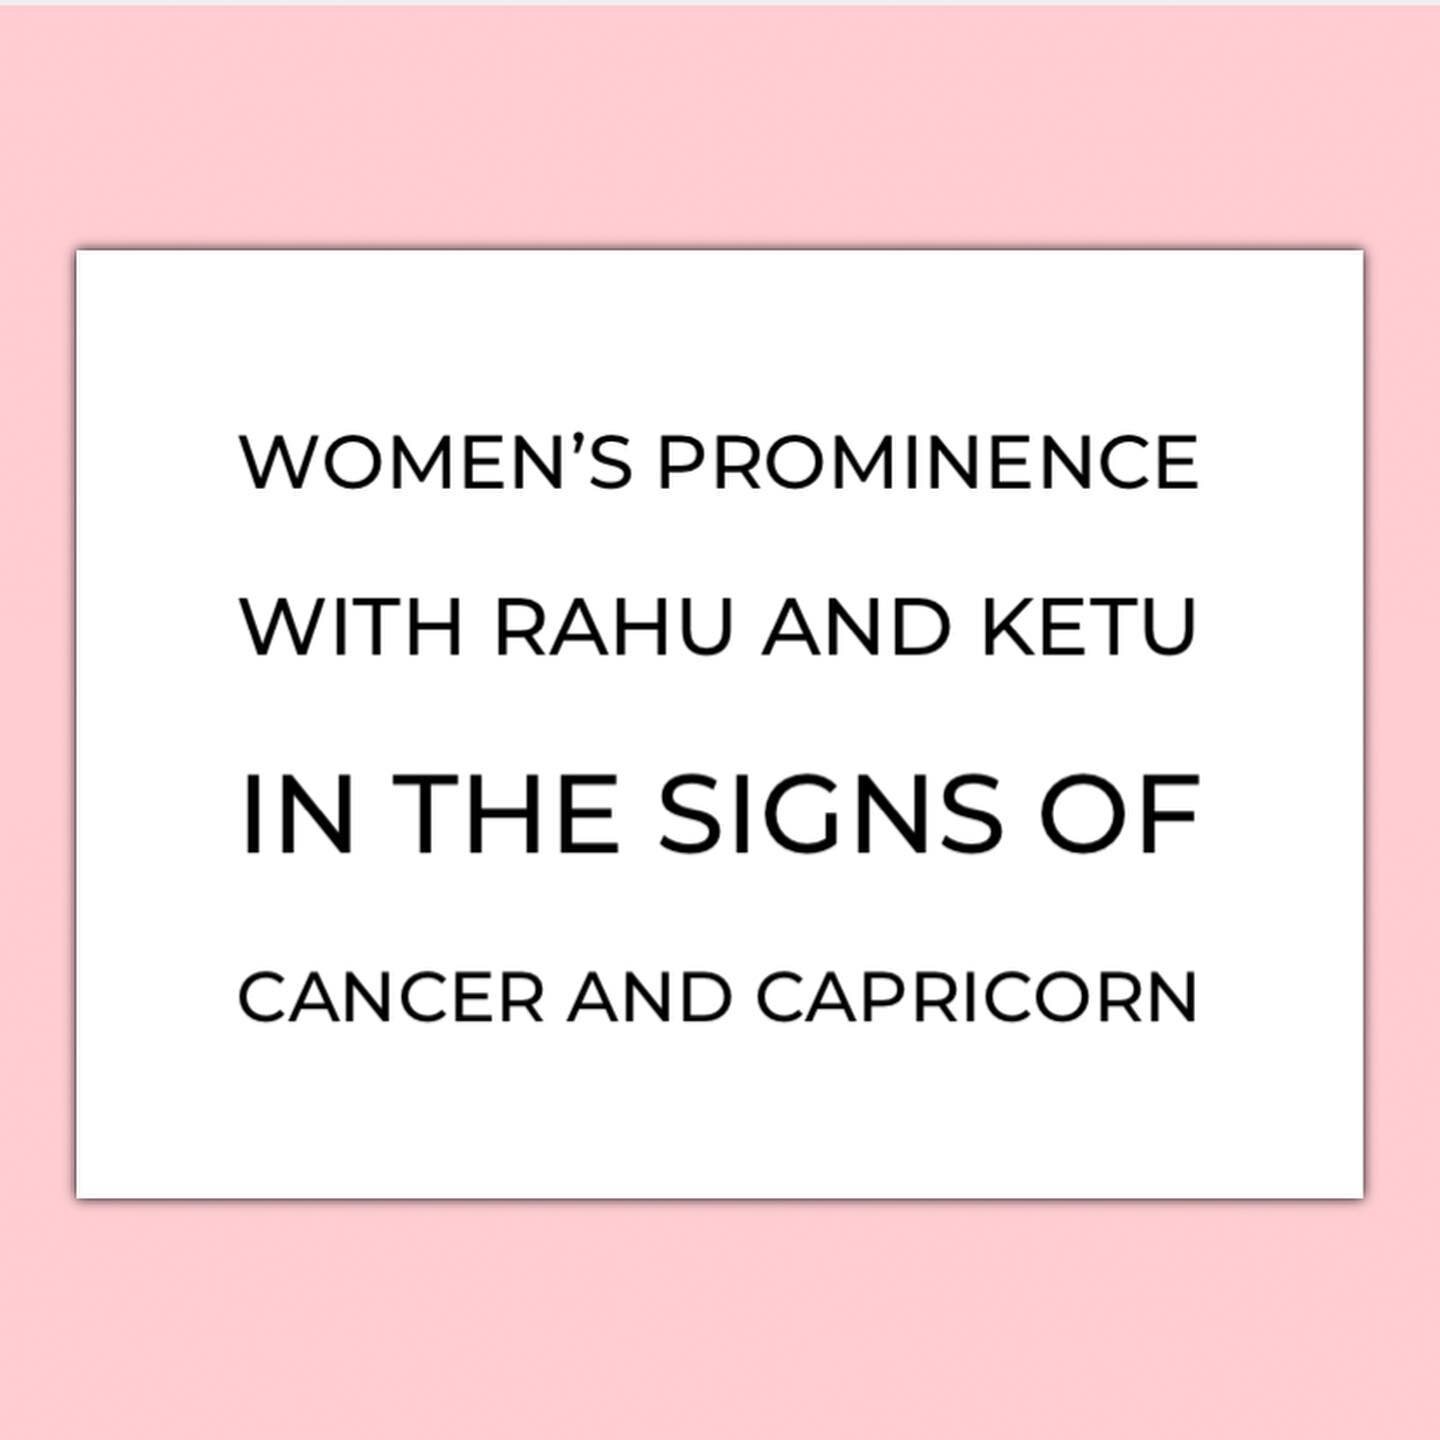 Where my ladies at?💁🏻&zwj;♀️💅🏽

When I discovered that the sign of cancer (particularly the Nakshatra of pushya) is highly relevant during women&rsquo;s related issues - I wasn&rsquo;t surprised in the slightest!

The sign of cancer is highly fem